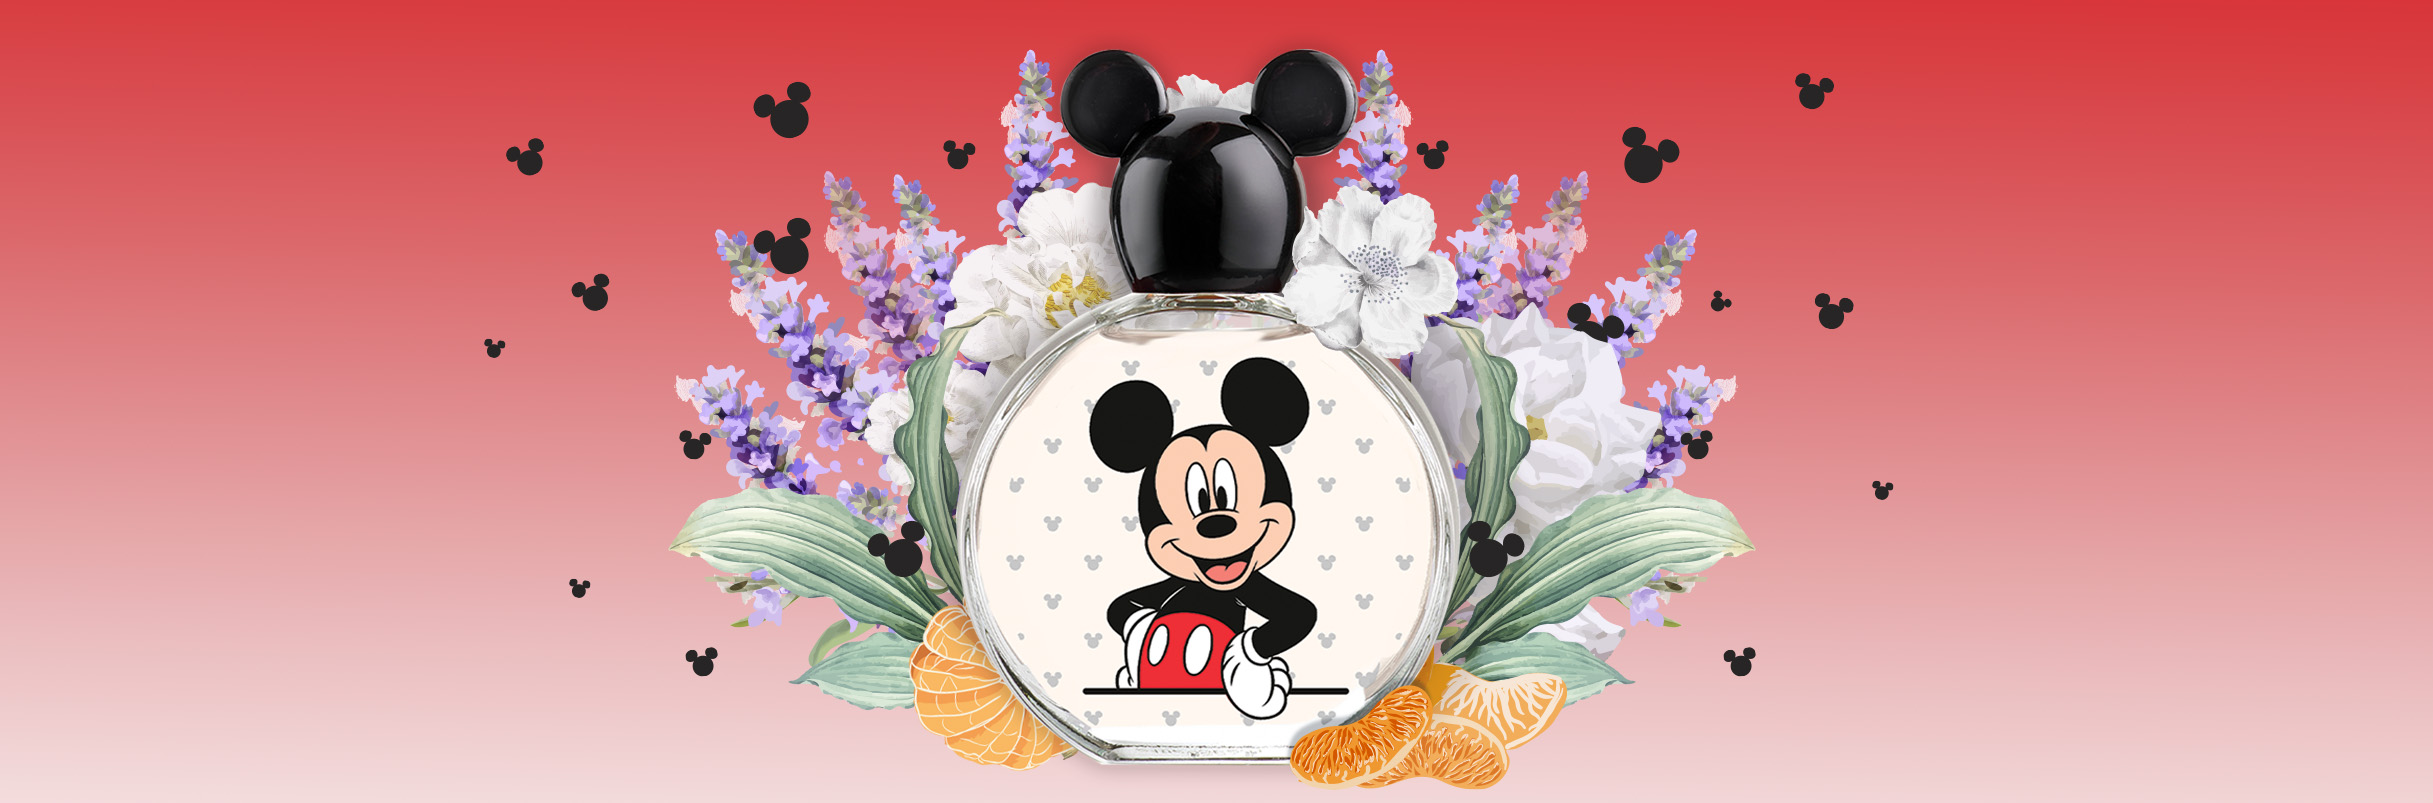 The Mickey Mouse fragrances